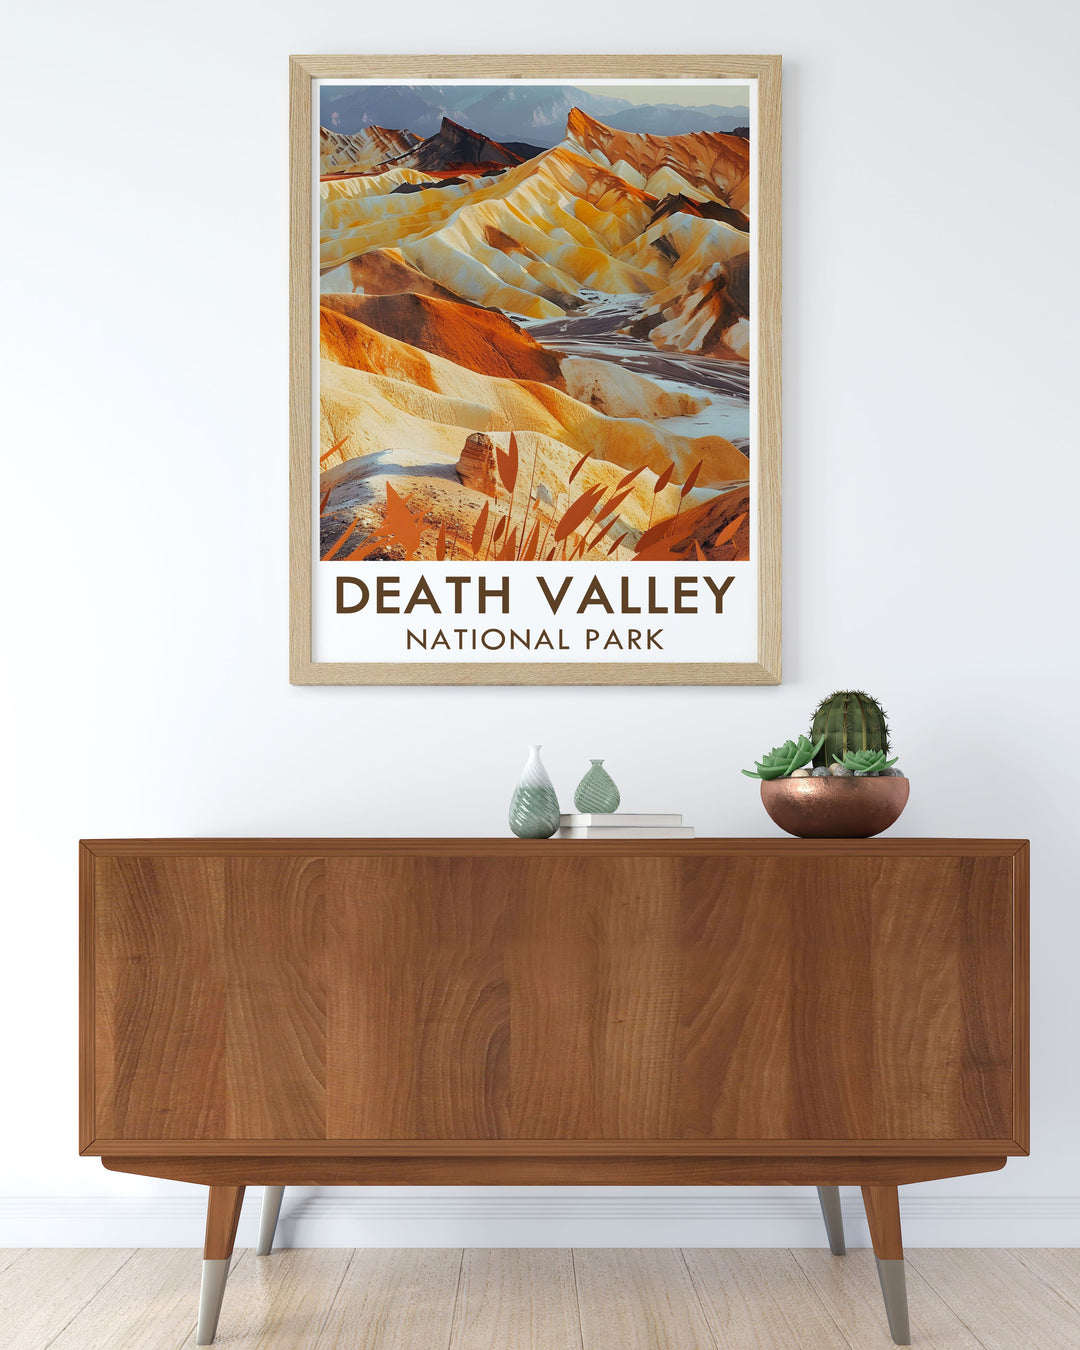 Framed art showcasing the serene beauty of Zabriskie Point in Death Valley, capturing the otherworldly landscape and the parks natural splendor.